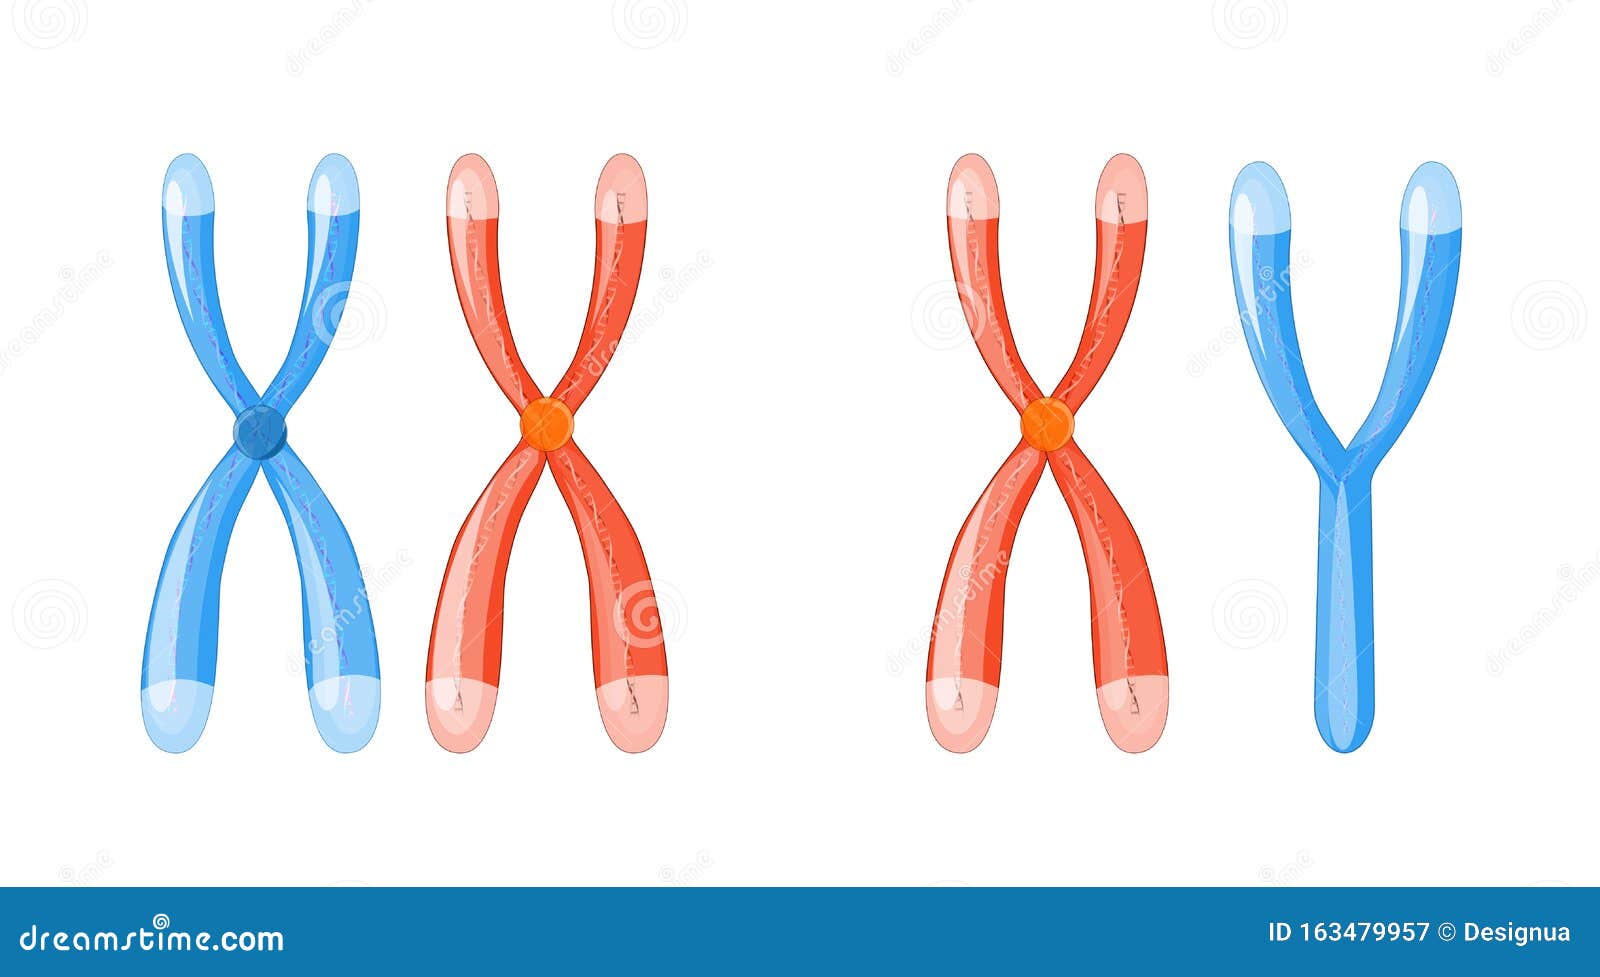 X And Y Chromosomes With Dna On A White Background Stock Vector